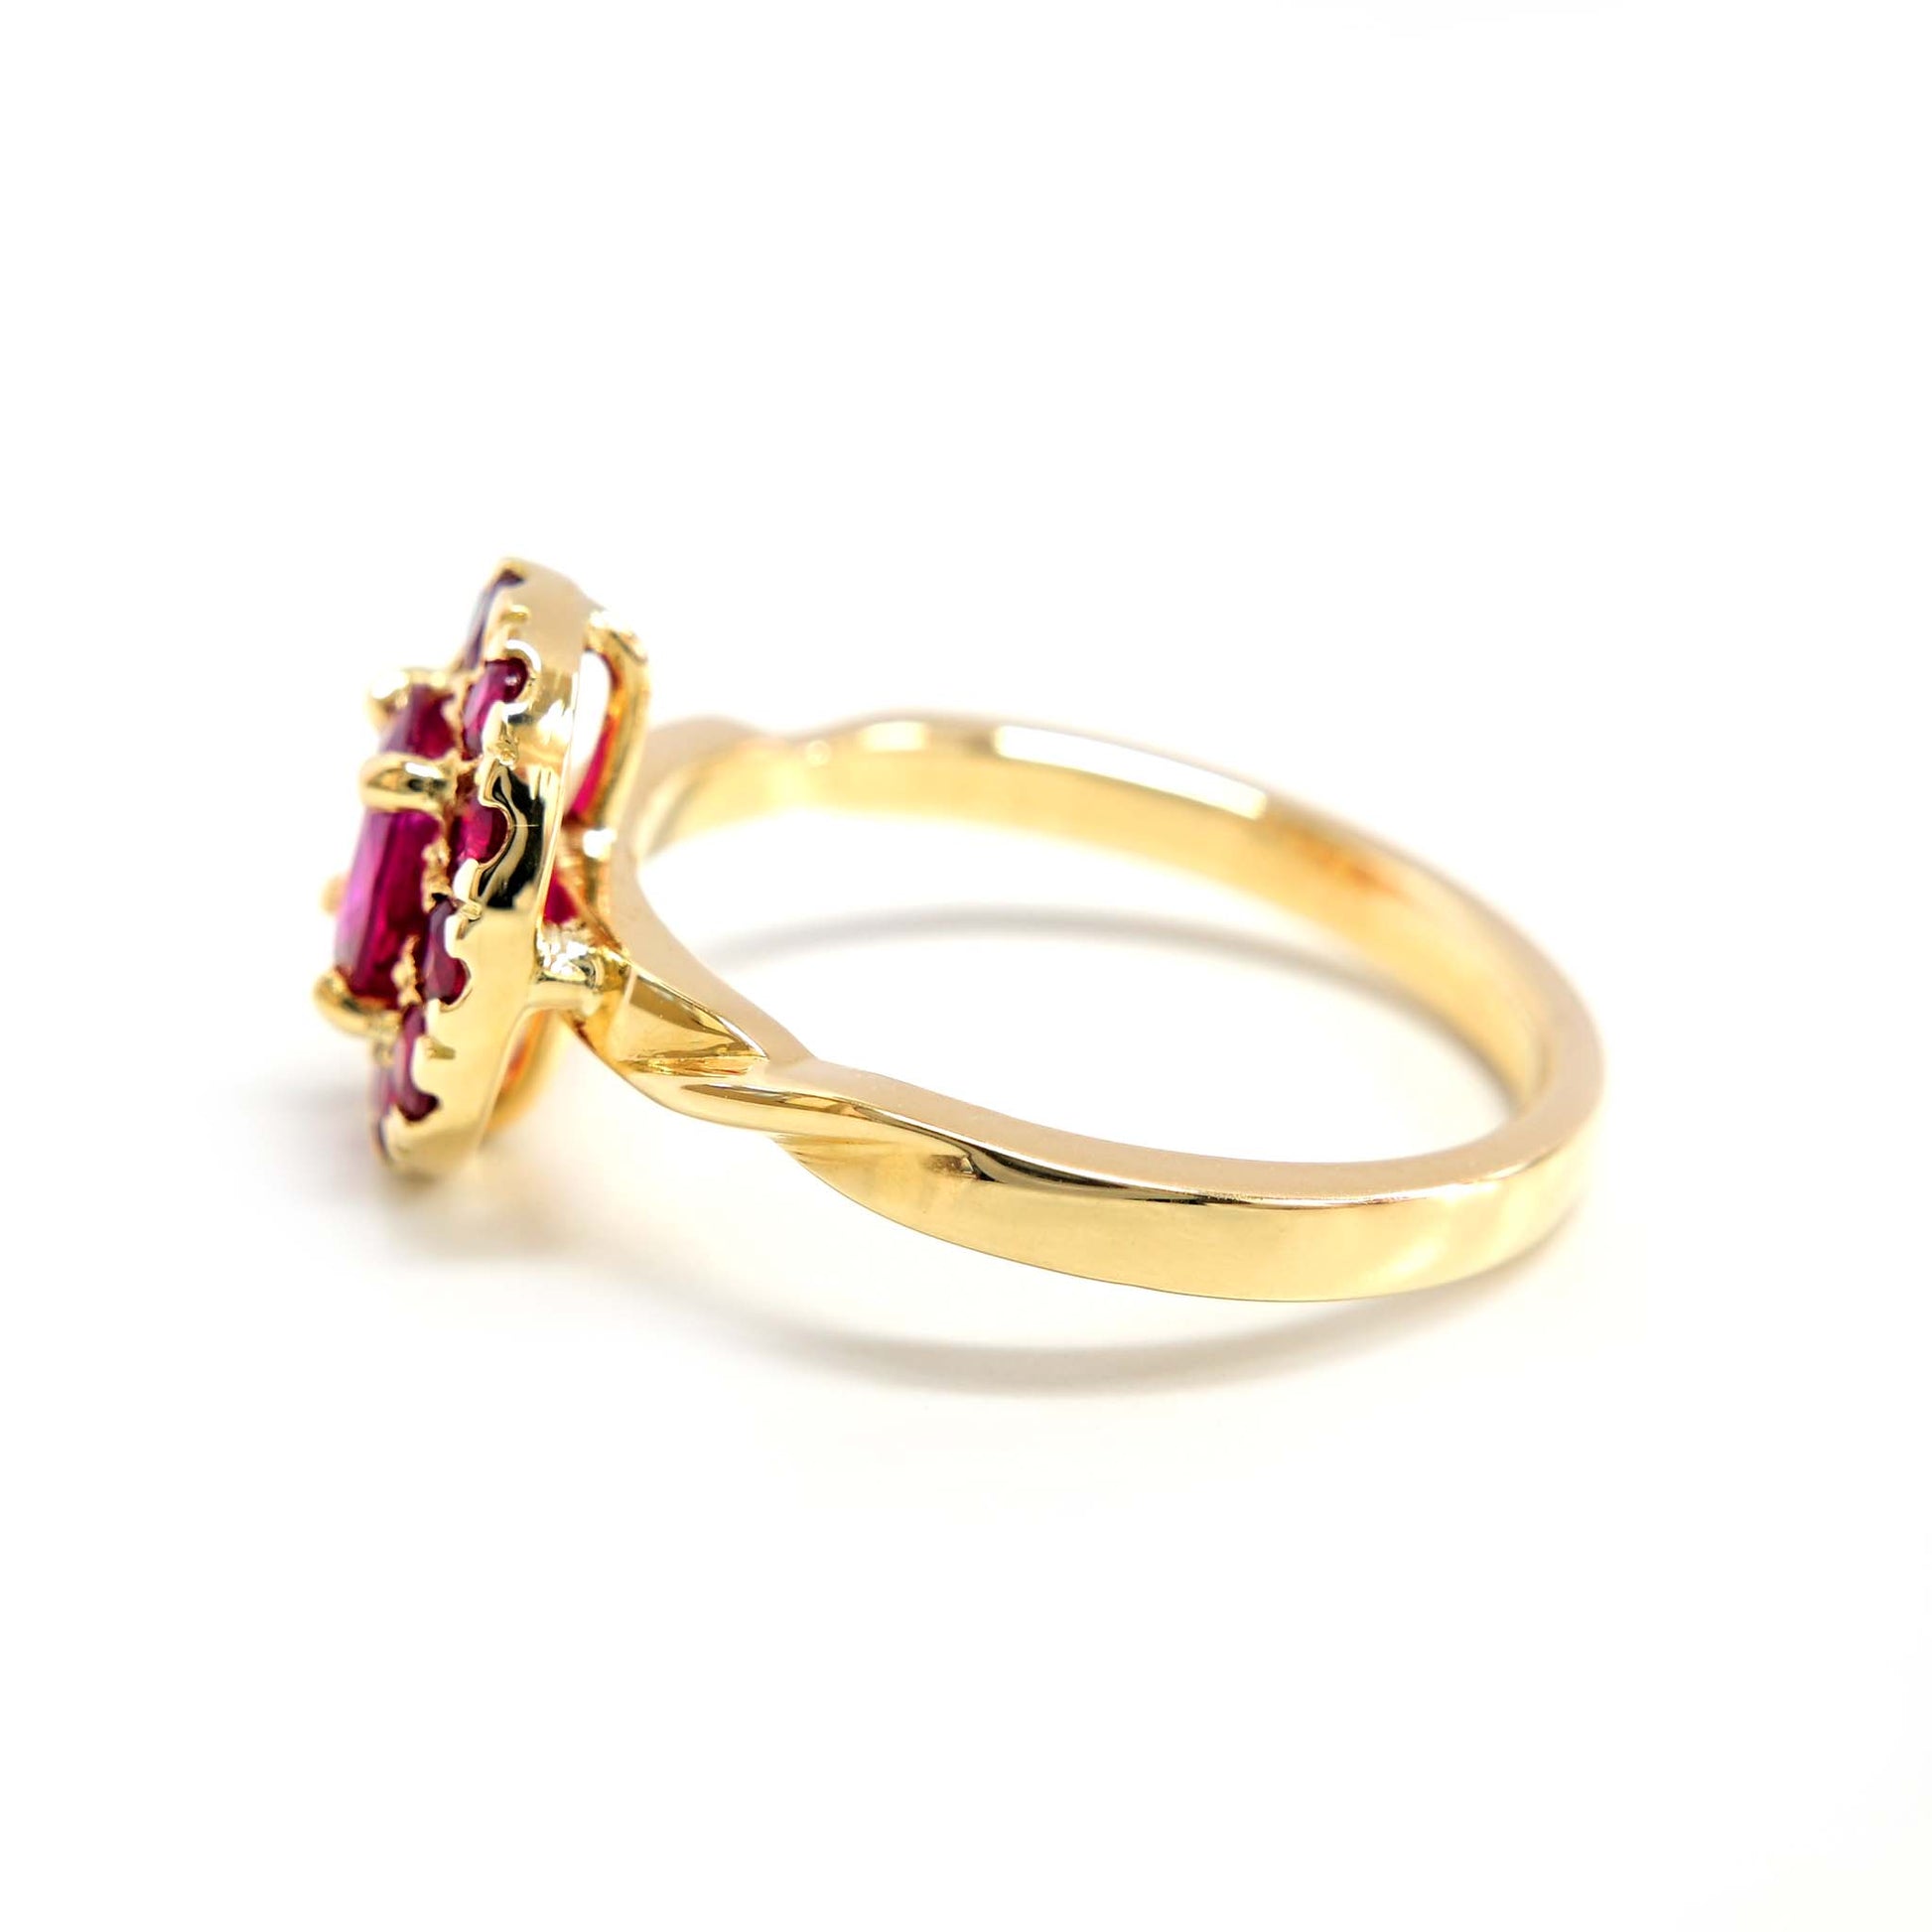 Dazzling ruby ring surrounded by a sparkling halo of rubies.